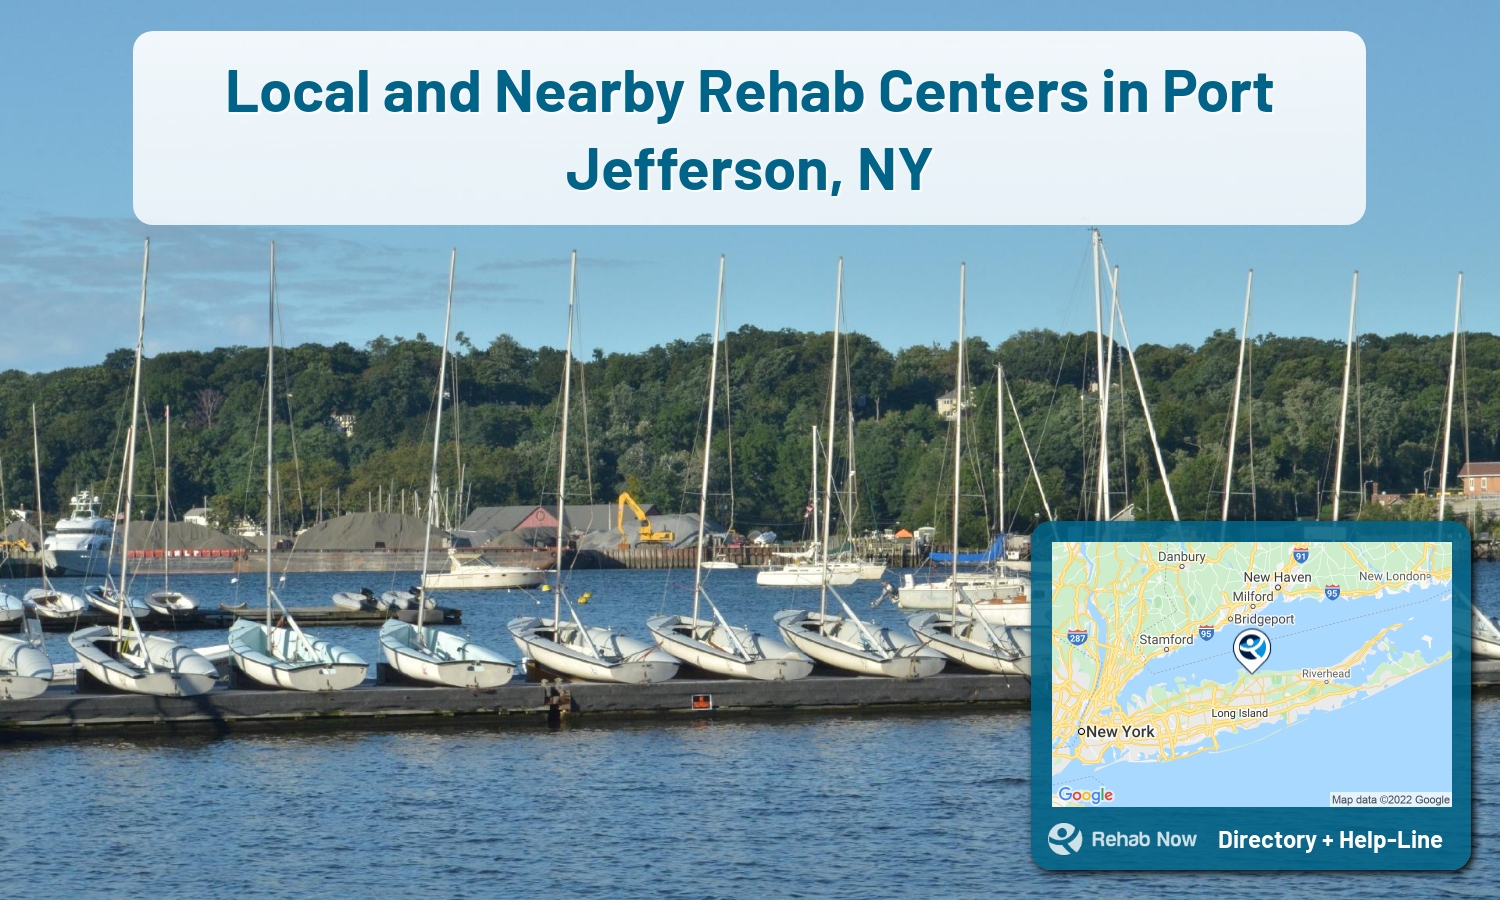 View options, availability, treatment methods, and more, for drug rehab and alcohol treatment in Port Jefferson, New York